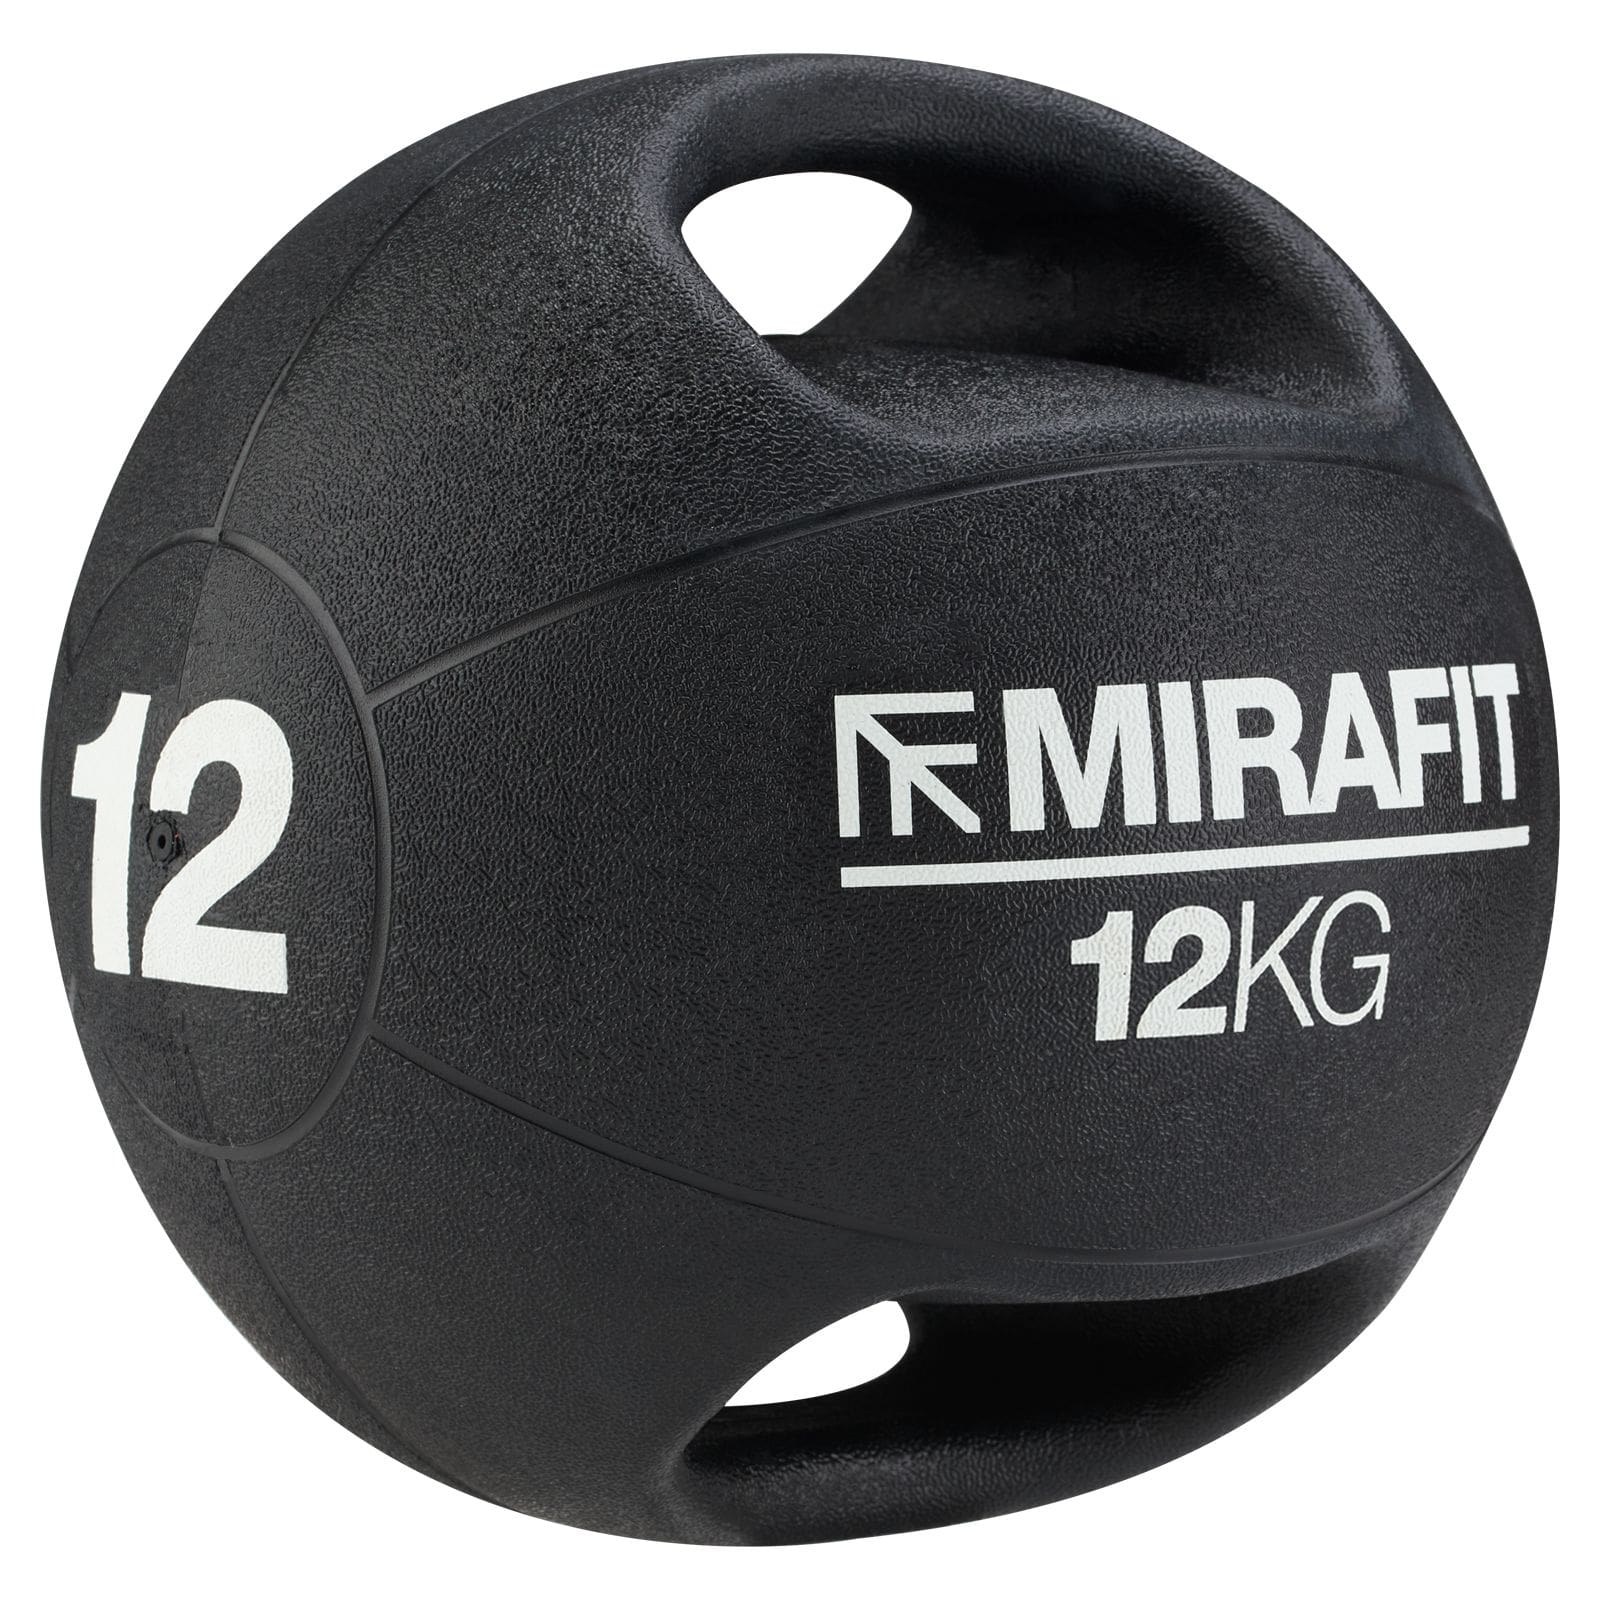 Weights of the Mirafit medicine ball with handles 12kg